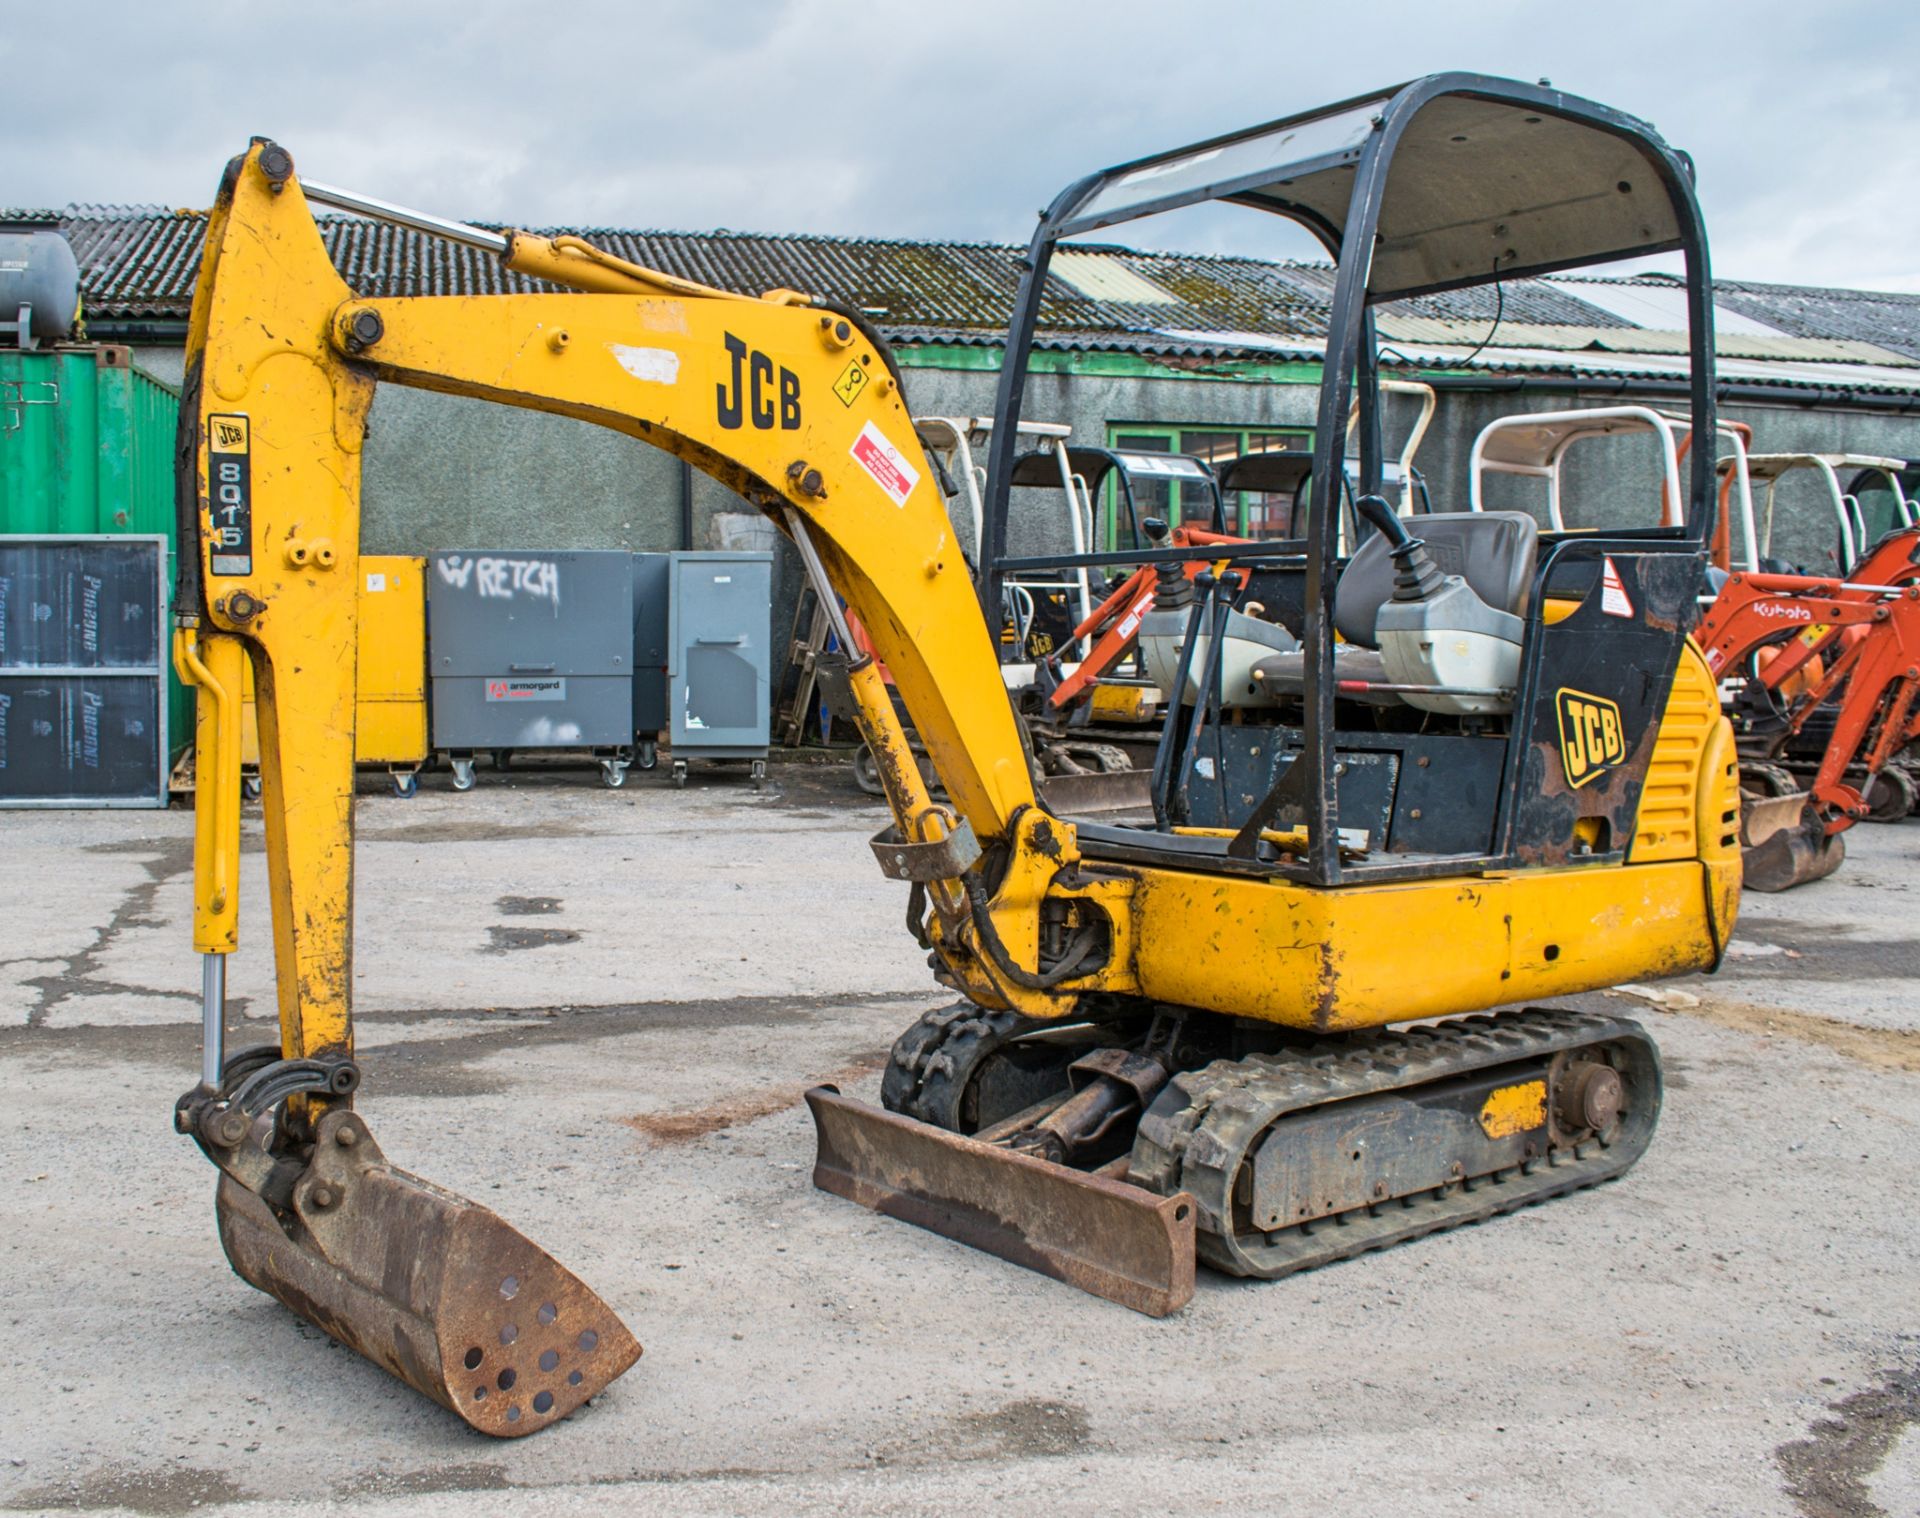 JCB 8015 1.5 tonne rubber tracked mini excavator Year: 2004 S/N: 1020825 Recorded Hours: 3032